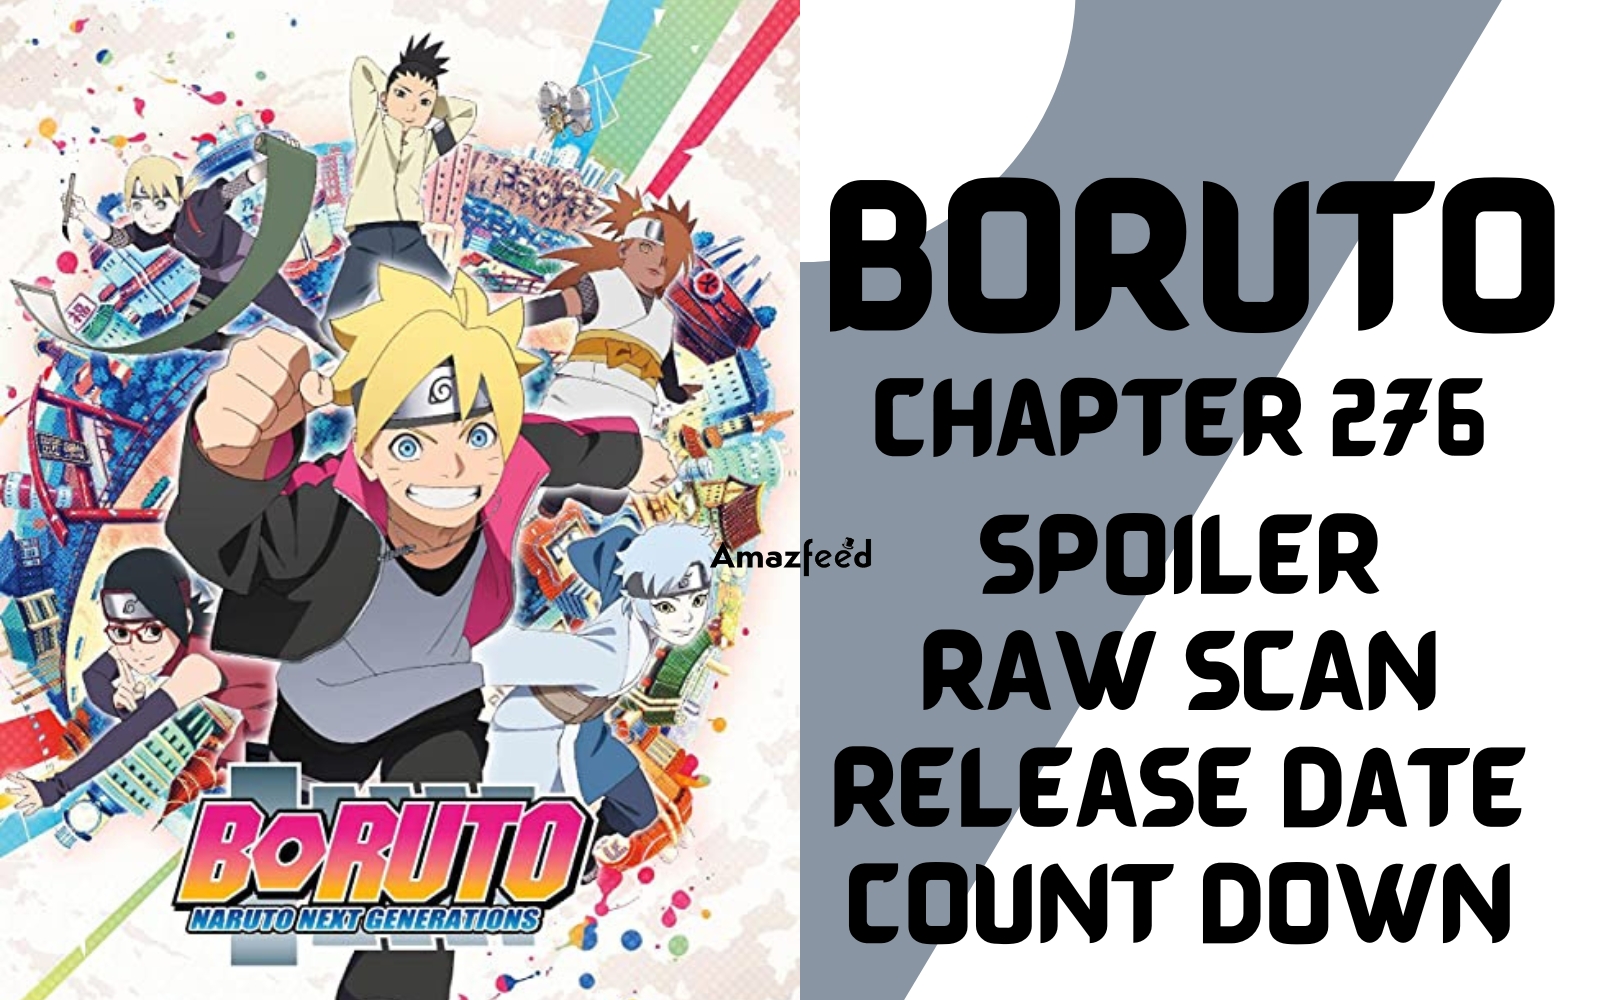 Boruto Episode 276 Spoiler, Release Date and Time, Countdown, Where to Watch, and More